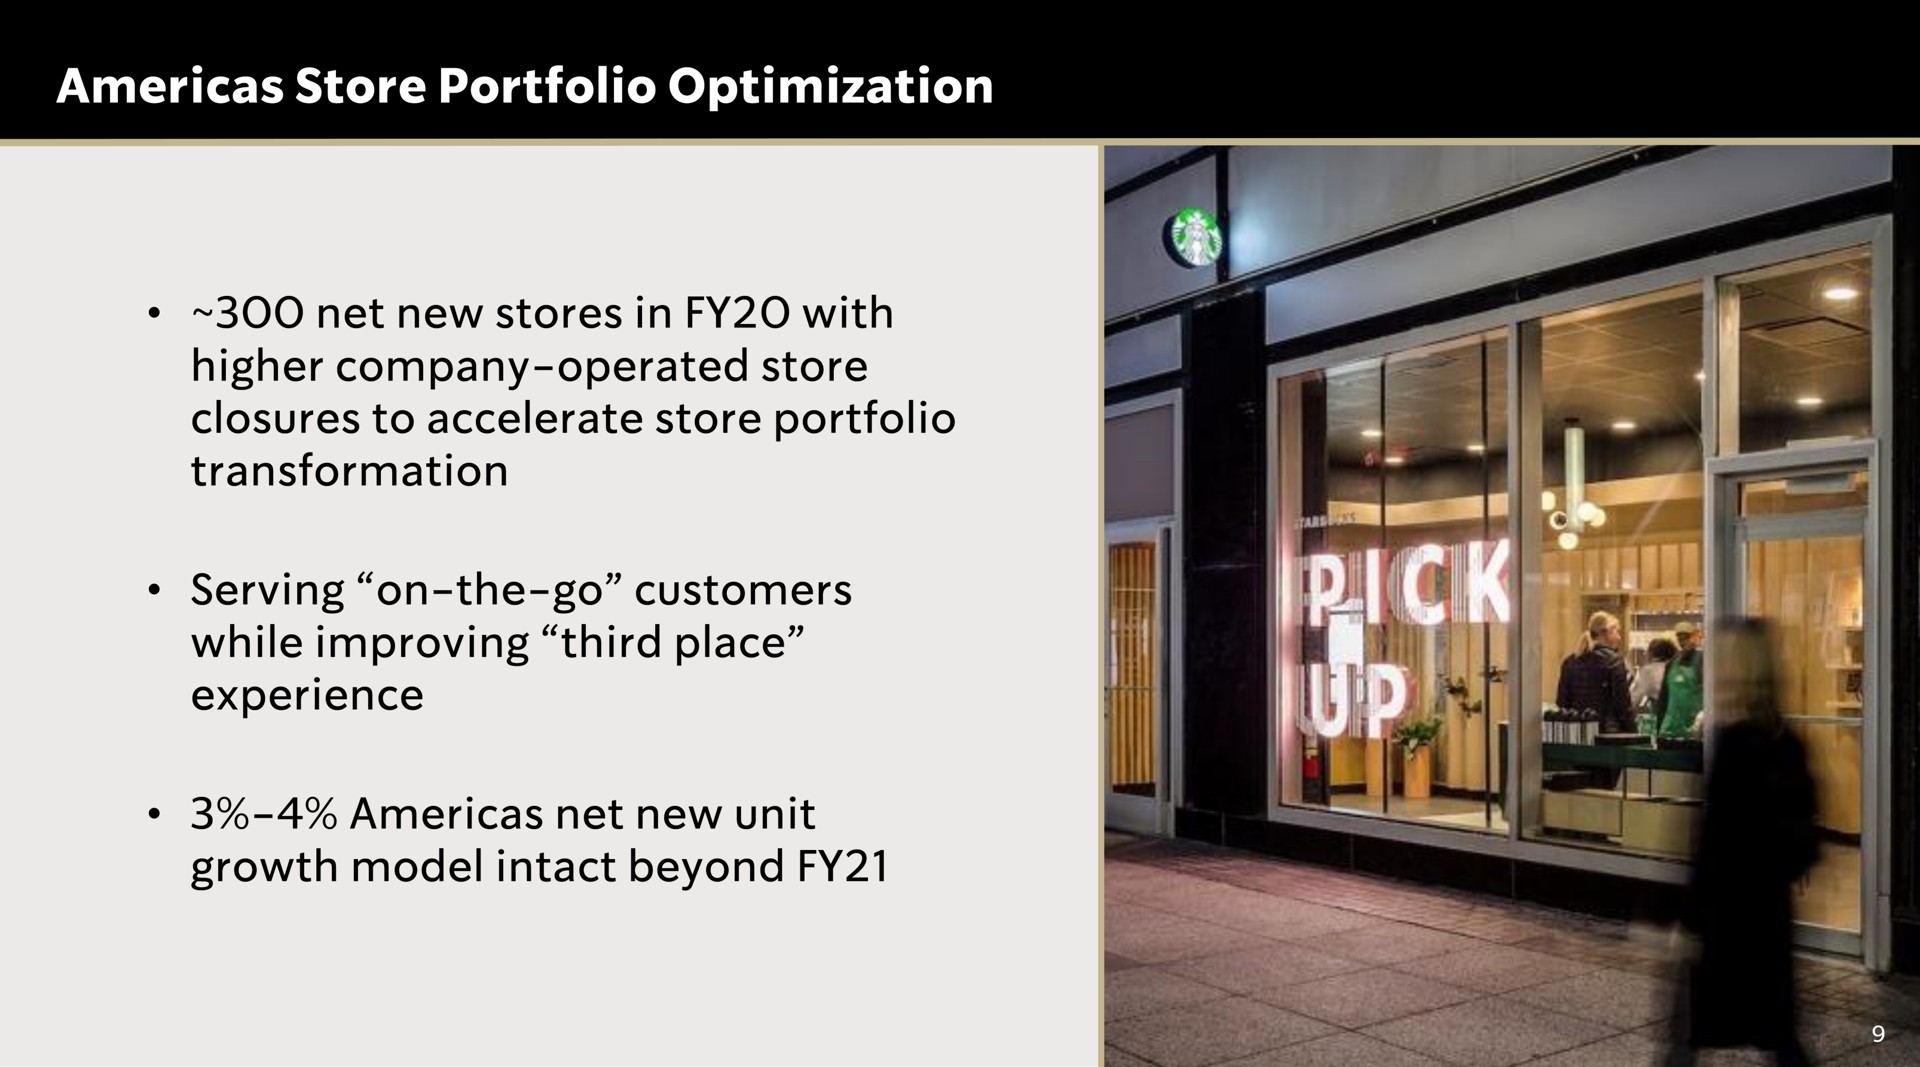 store portfolio optimization net new stores in with higher company operated store closures to accelerate store portfolio transformation net new unit serving on the go customers while improving third place experience growth model intact beyond | Starbucks